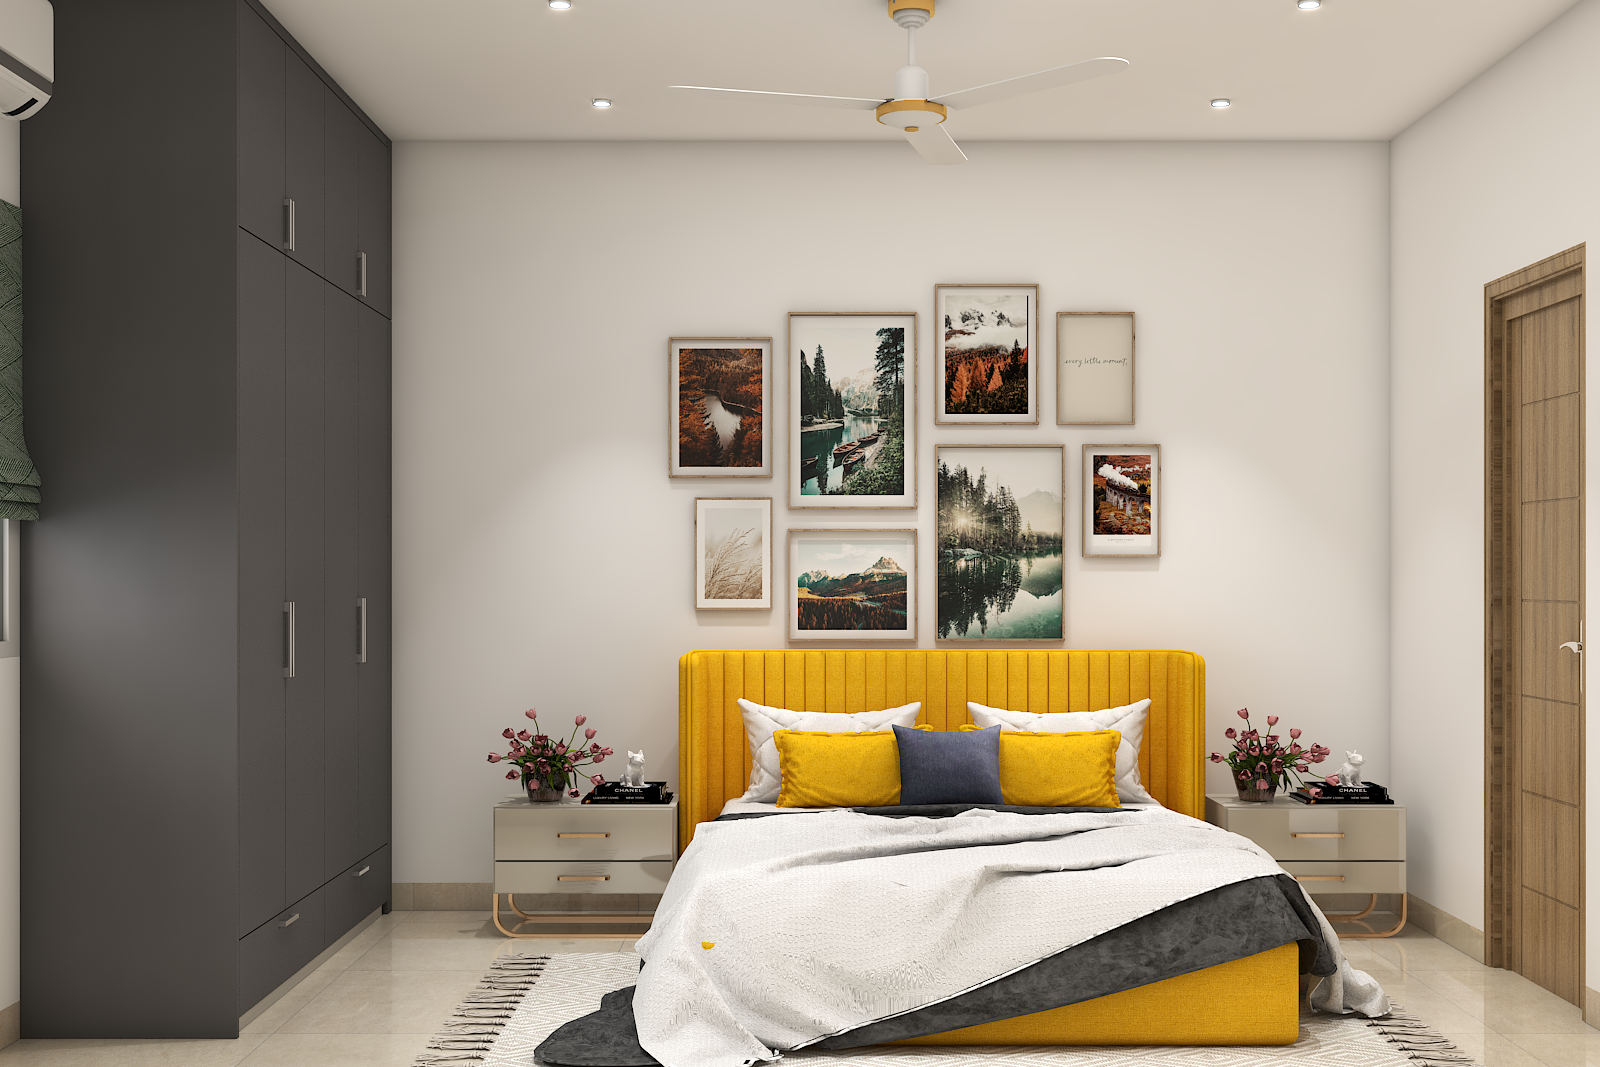 Eclectic Themed Spacious Master Bedroom Design